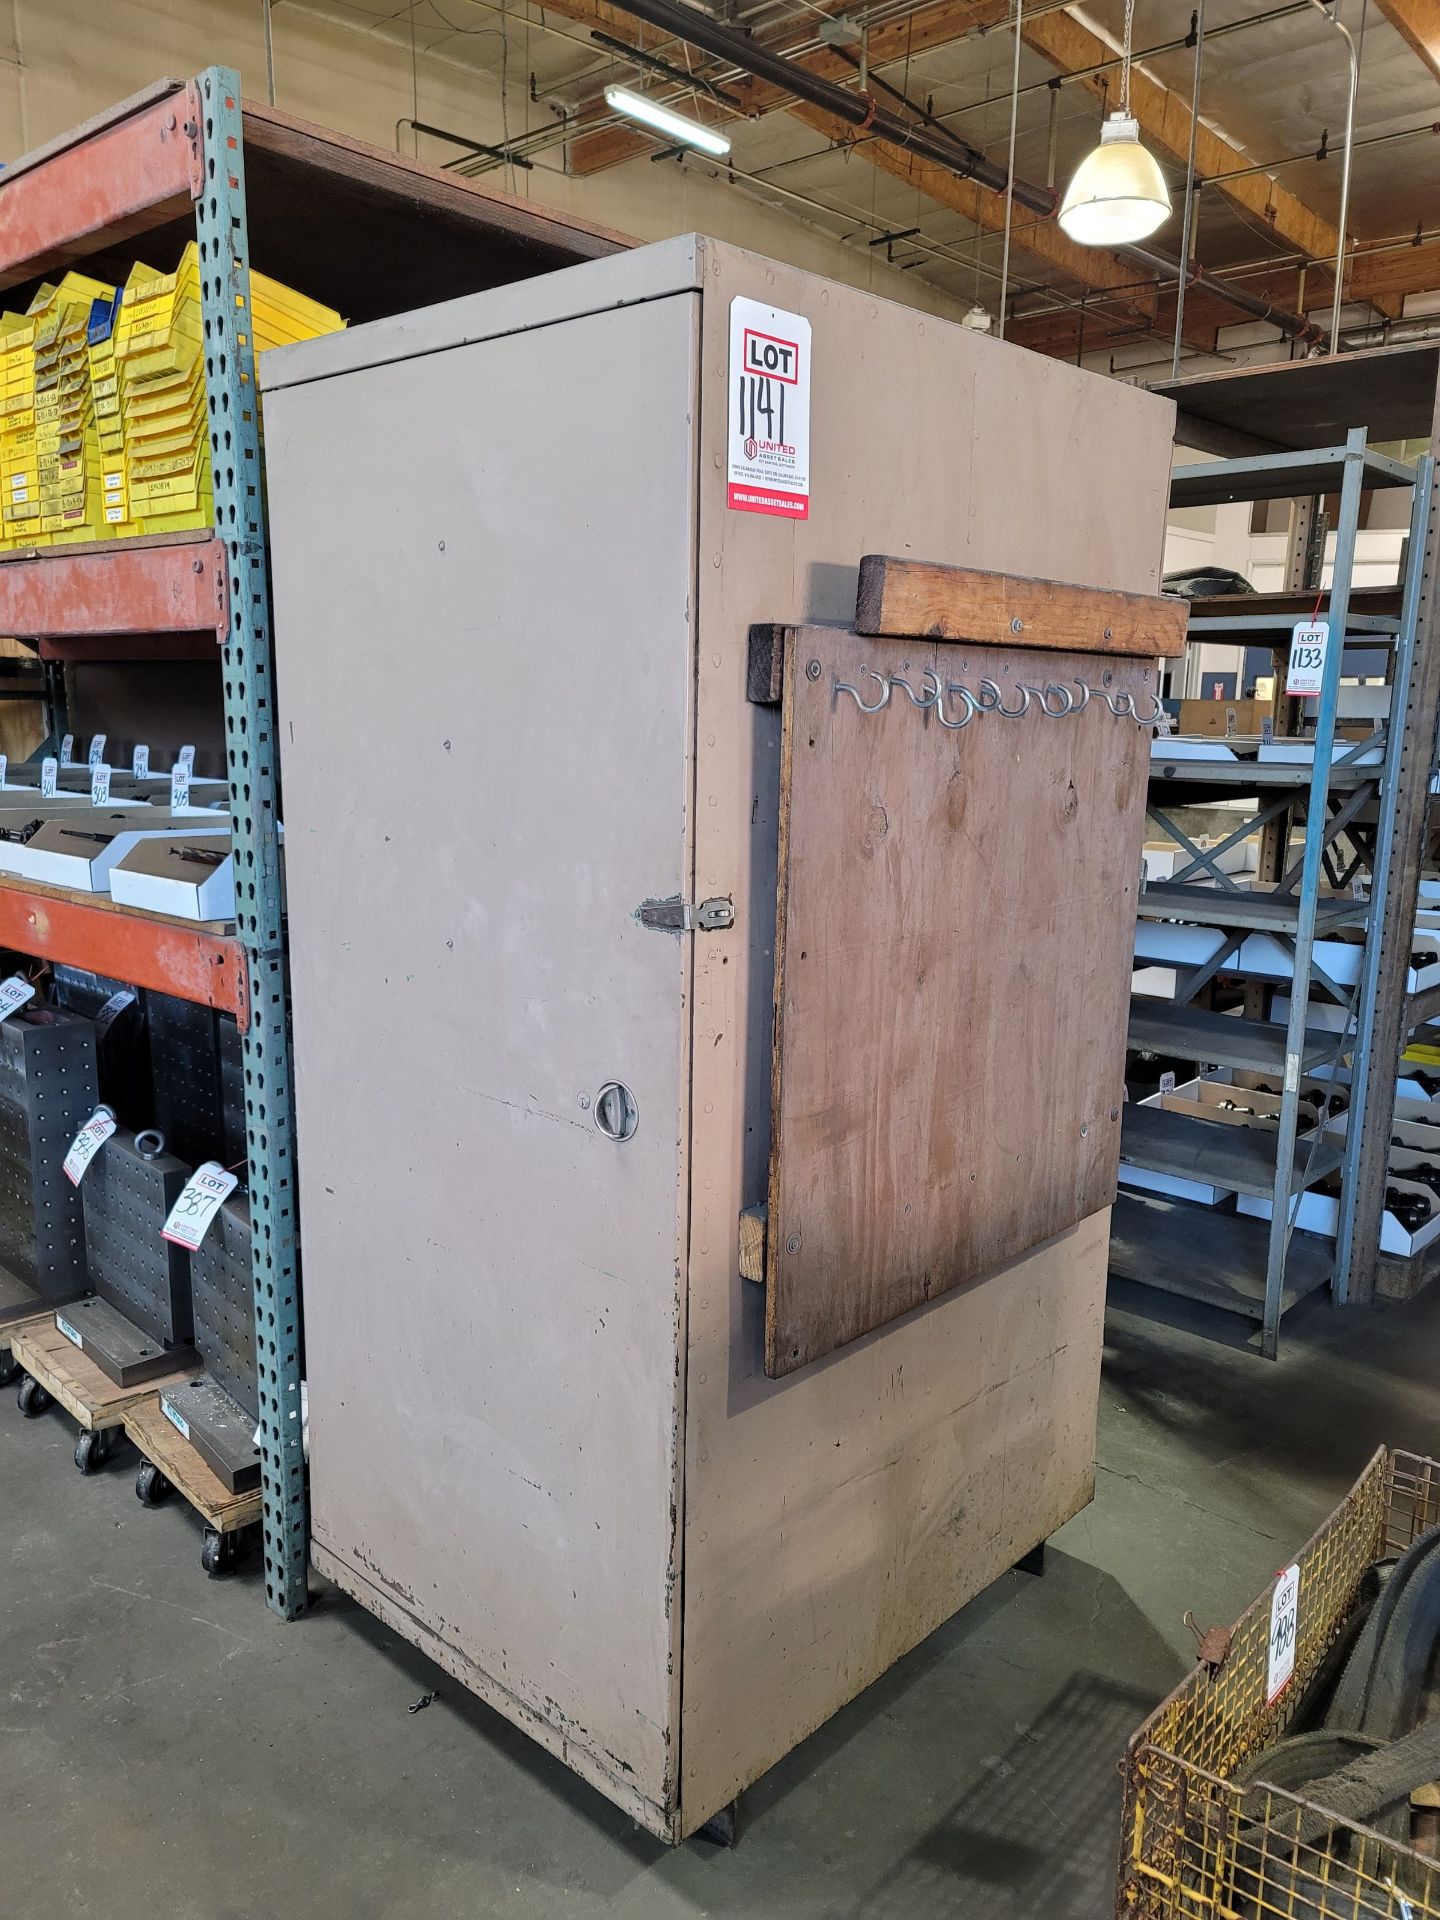 LOT - STORAGE CABINET, TWO CABINETS IN ONE W/ DOORS ON OPPOSITE ENDS, 34" X 44" X 80" HT, COMES WITH